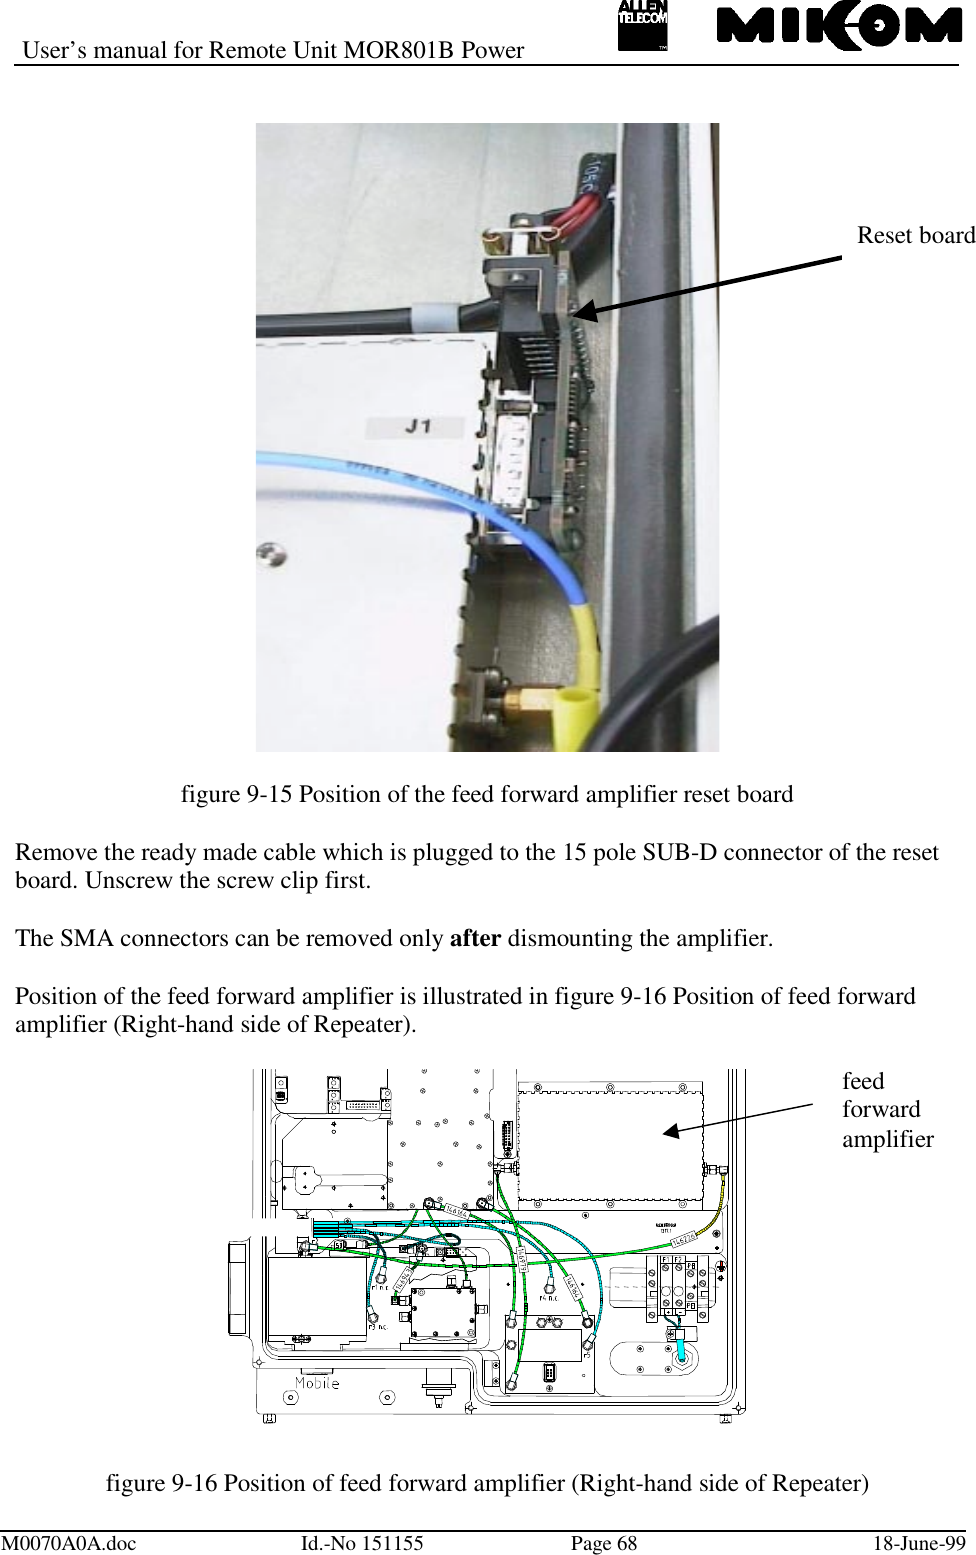 User’s manual for Remote Unit MOR801B PowerM0070A0A.doc Id.-No 151155 Page 68 18-June-99figure 9-15 Position of the feed forward amplifier reset boardRemove the ready made cable which is plugged to the 15 pole SUB-D connector of the resetboard. Unscrew the screw clip first.The SMA connectors can be removed only after dismounting the amplifier.Position of the feed forward amplifier is illustrated in figure 9-16 Position of feed forwardamplifier (Right-hand side of Repeater).figure 9-16 Position of feed forward amplifier (Right-hand side of Repeater)Reset boardfeedforwardamplifier